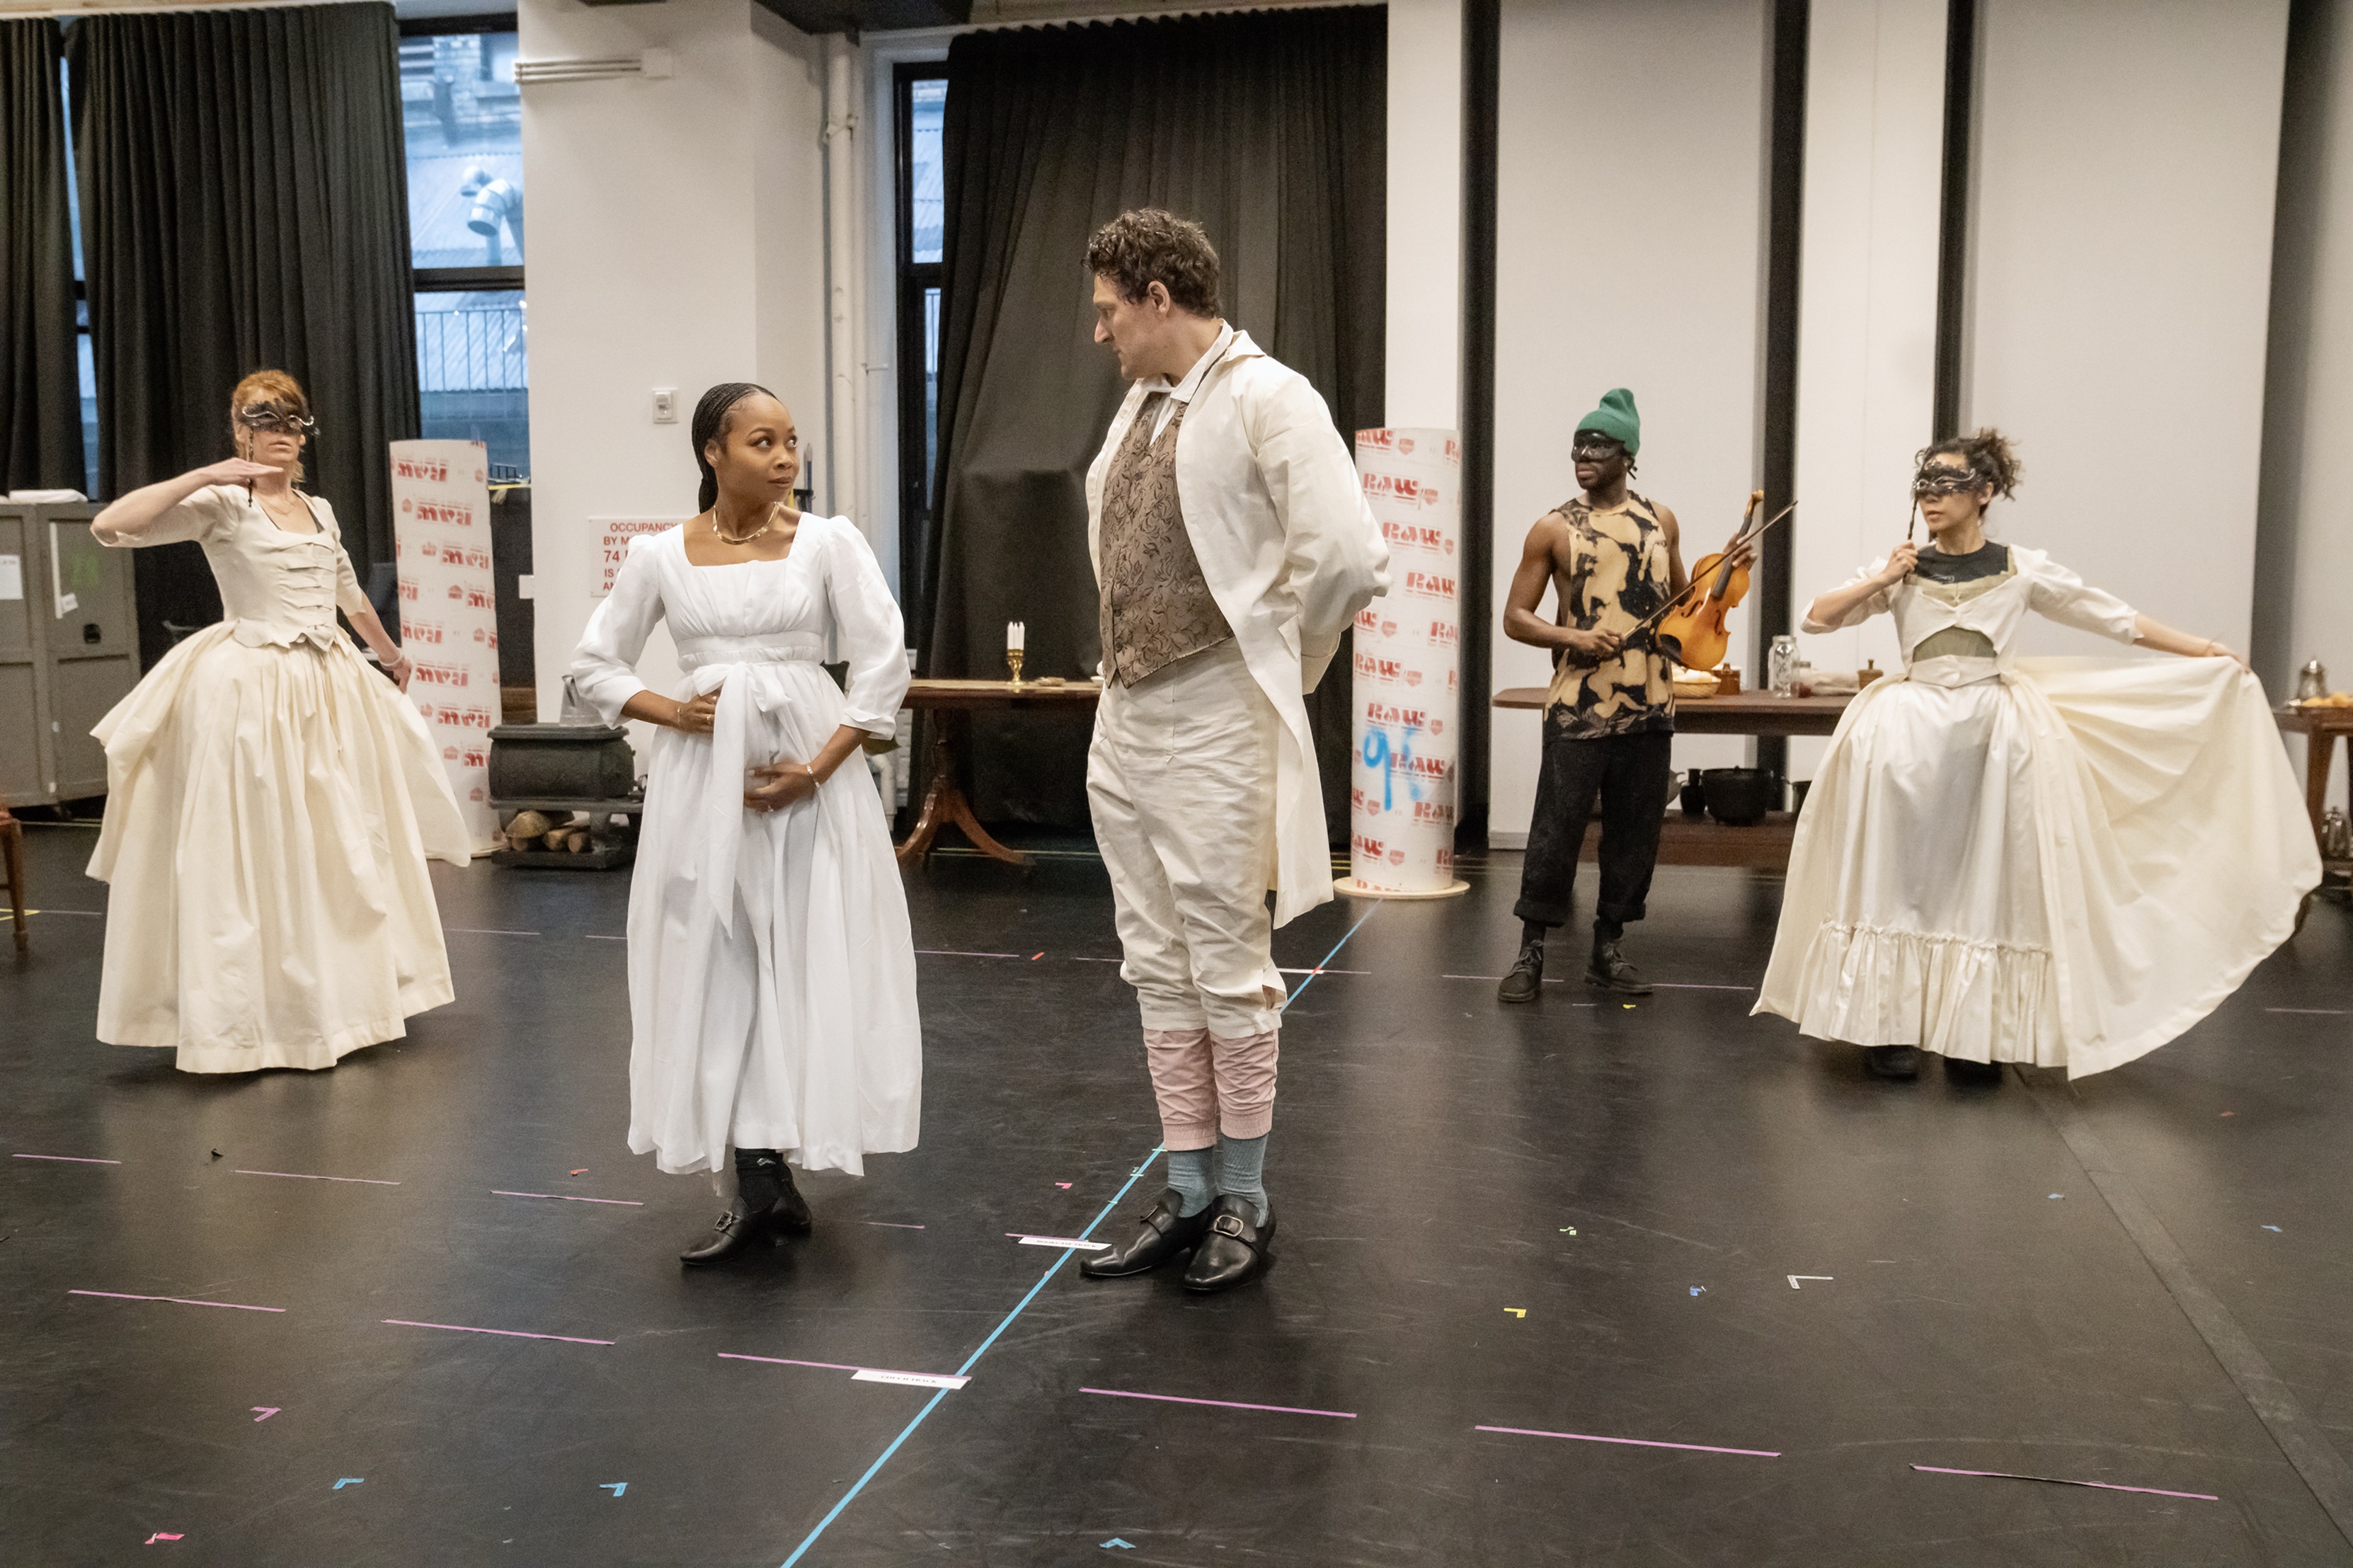 Kate Nowlin, Sheria Irving, Gabriel Ebert, Leland Fowler, and Sun Mee Chomet in rehearsal for the New York premiere of Sally & Tom, written by Suzan-Lori Parks and directed by Steve H. Broadnax III, at The Public Theater. Photo Credit: Joan Marcus. 